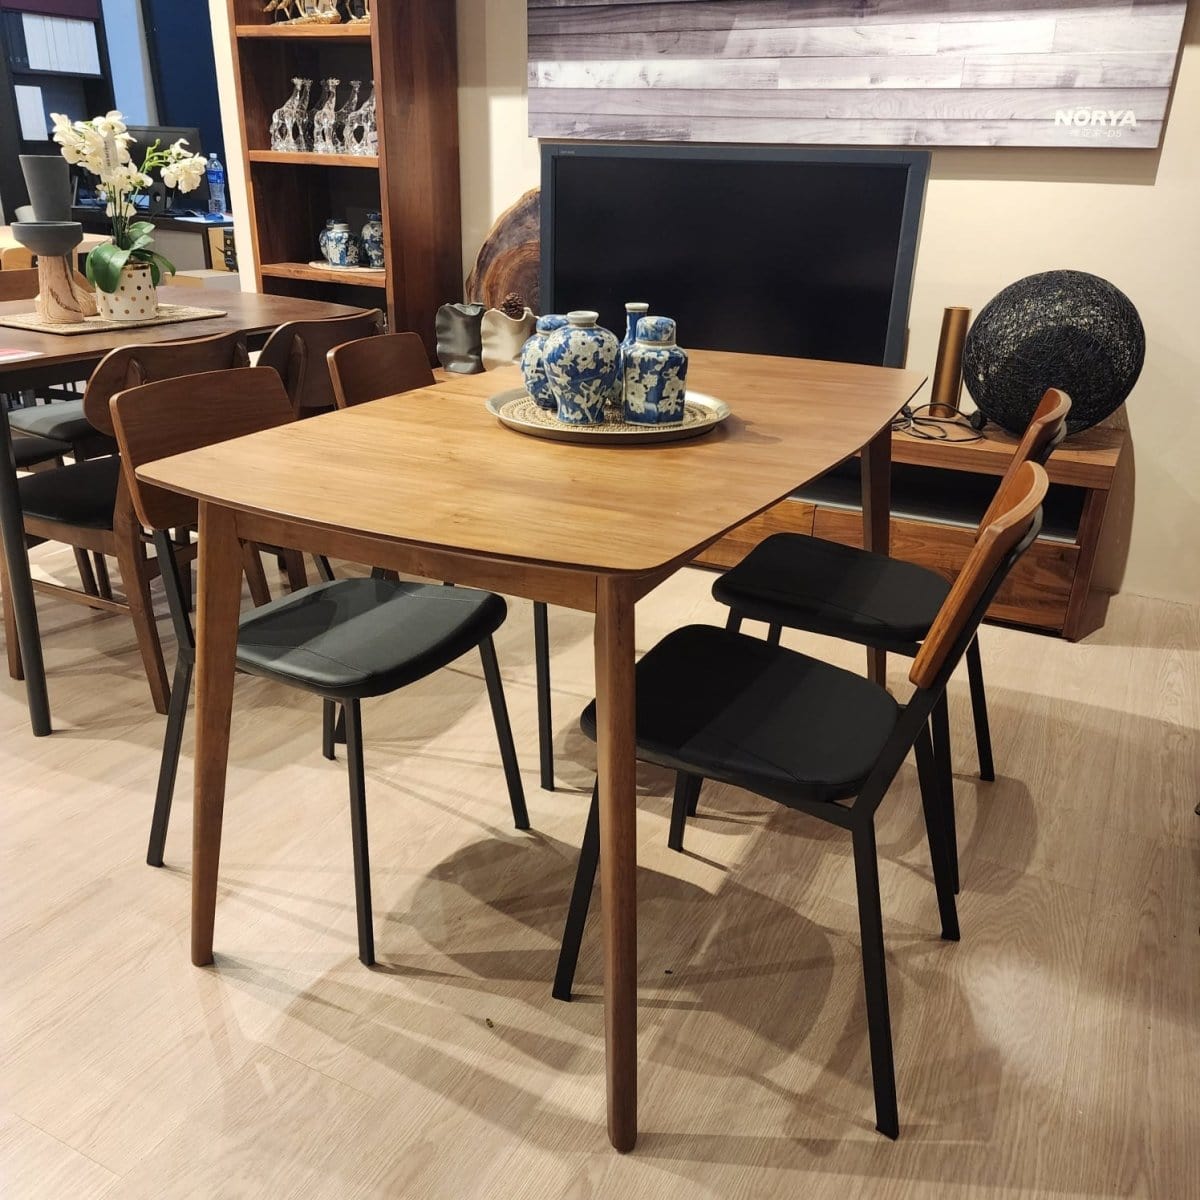 #1 6/8-Seater 1.4m~1.8m Solid Wood Extendable Dining Set (Sarah 1.5m Extendable Dining Table + 6/8 Sprint Dining Chairs) picket and rail